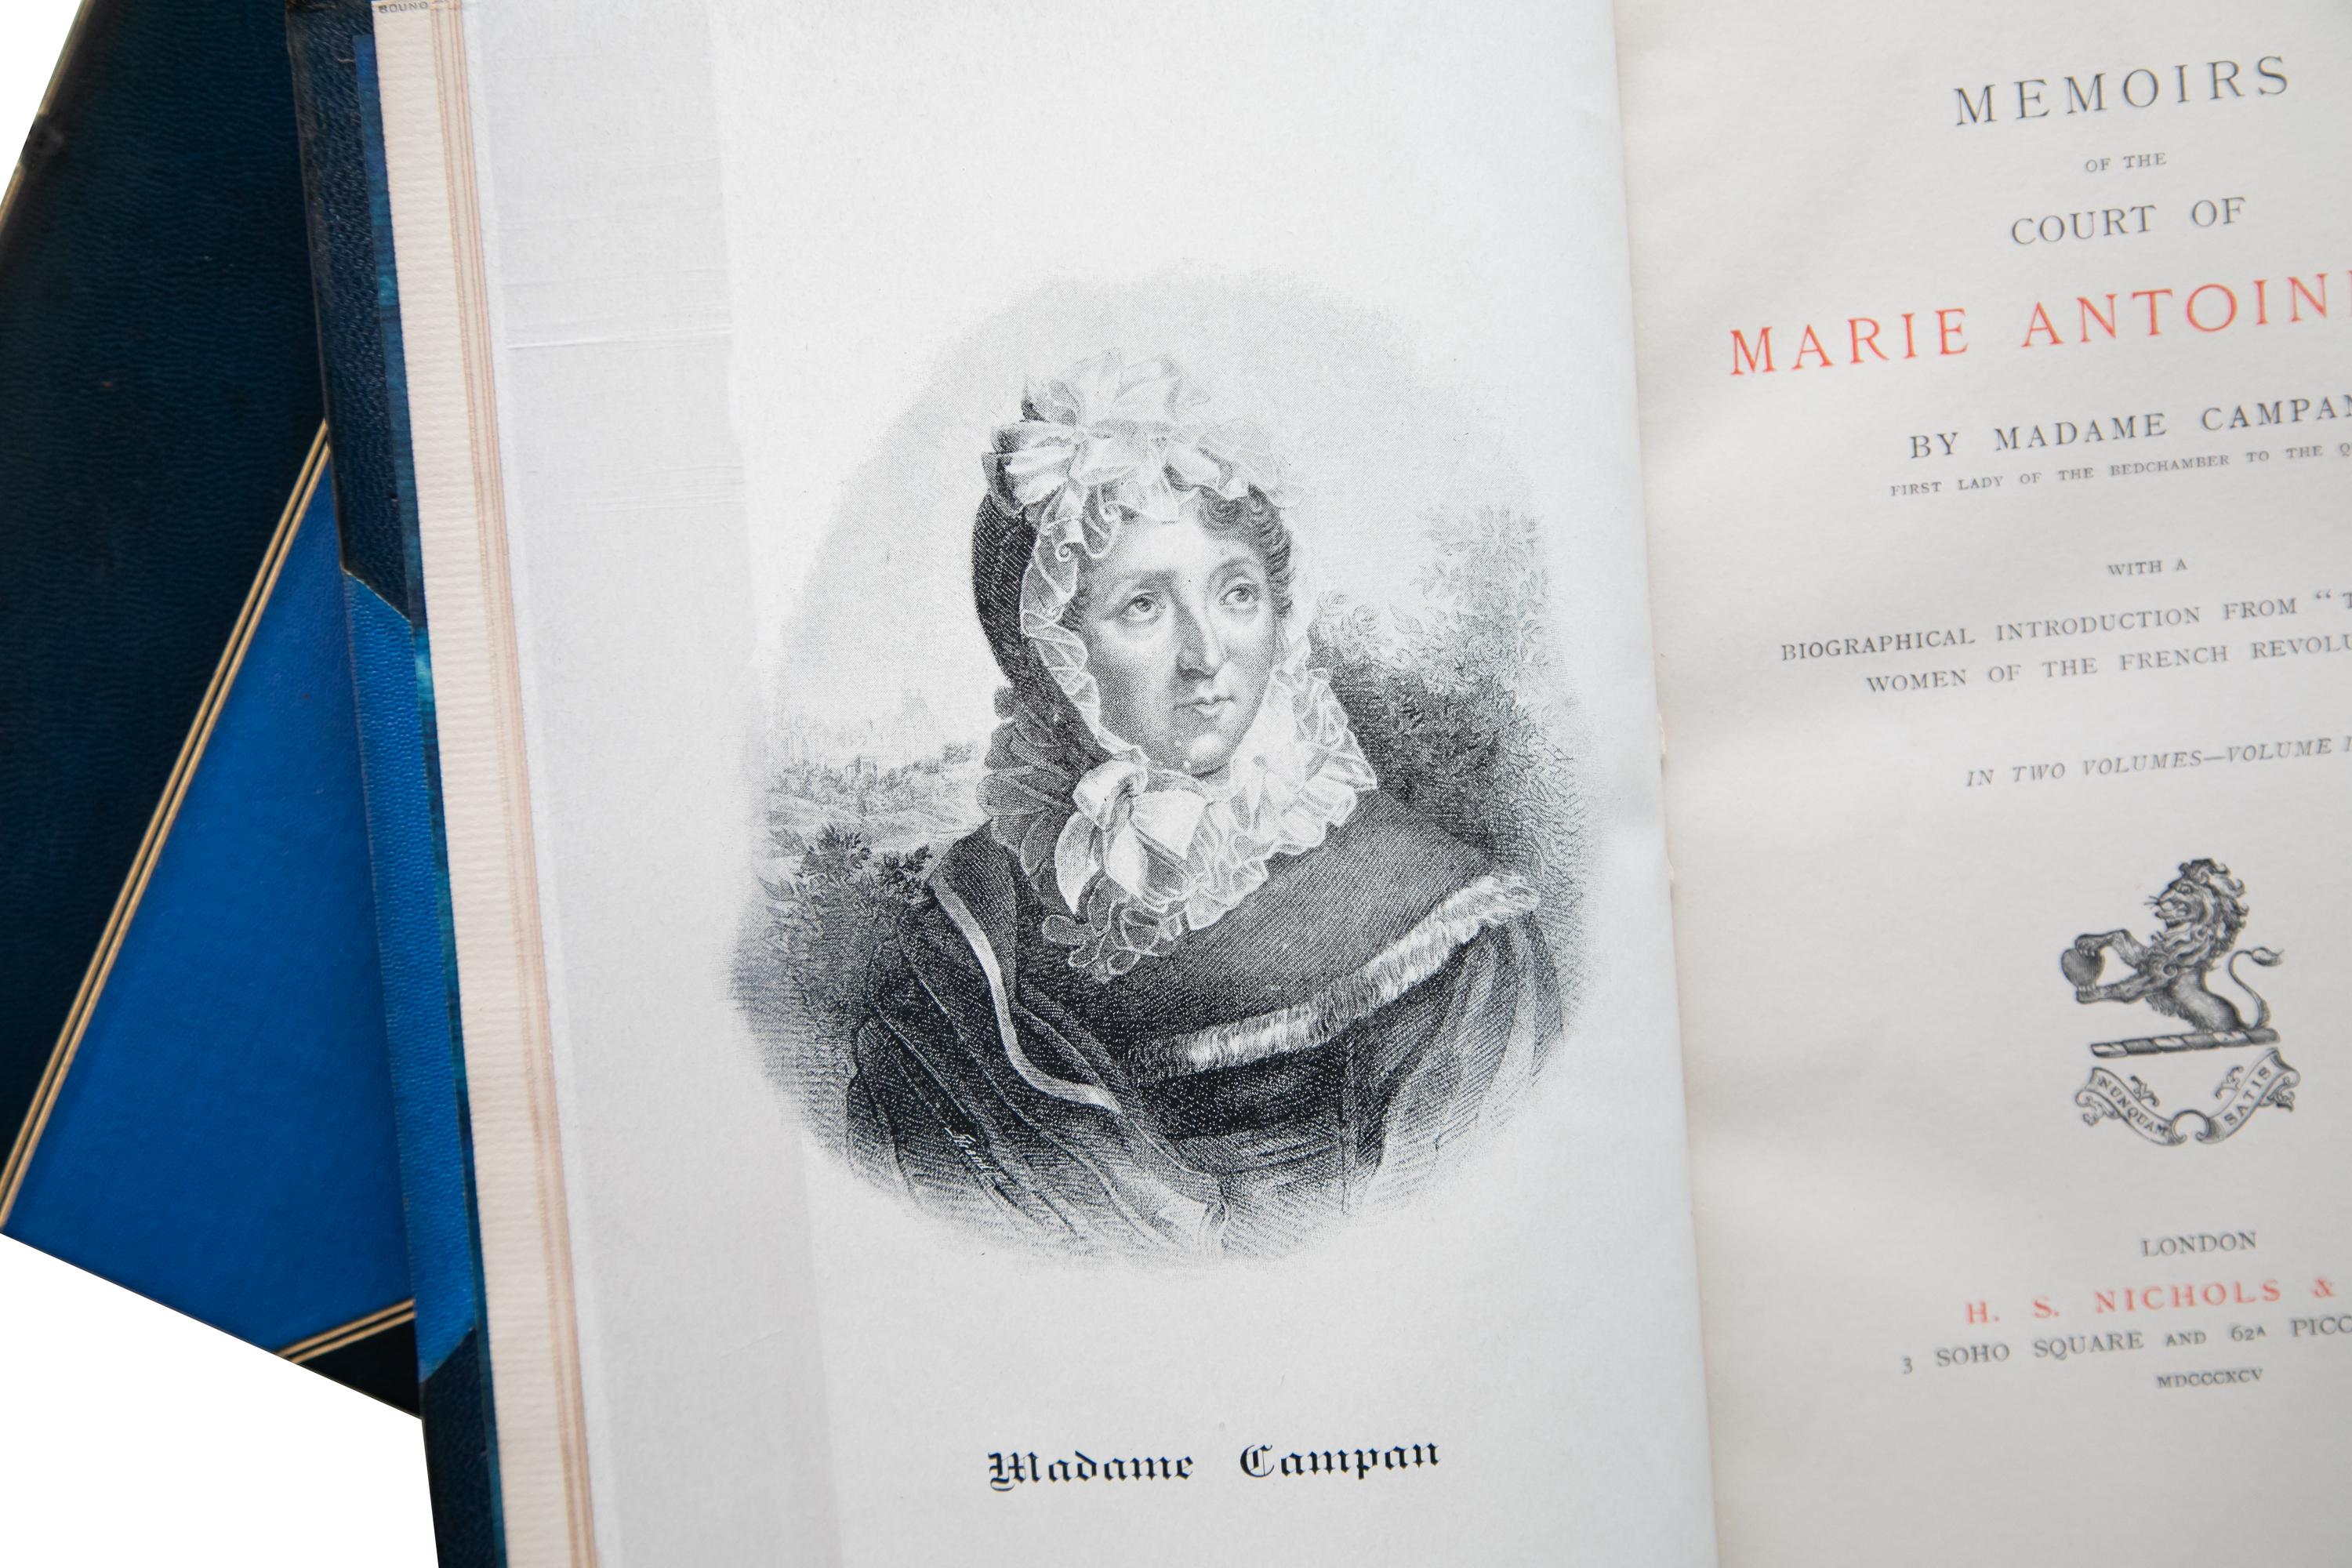 19th Century 2 Volumes. Madame Campan, The Memoirs of the Court of Marie Antoinette. For Sale